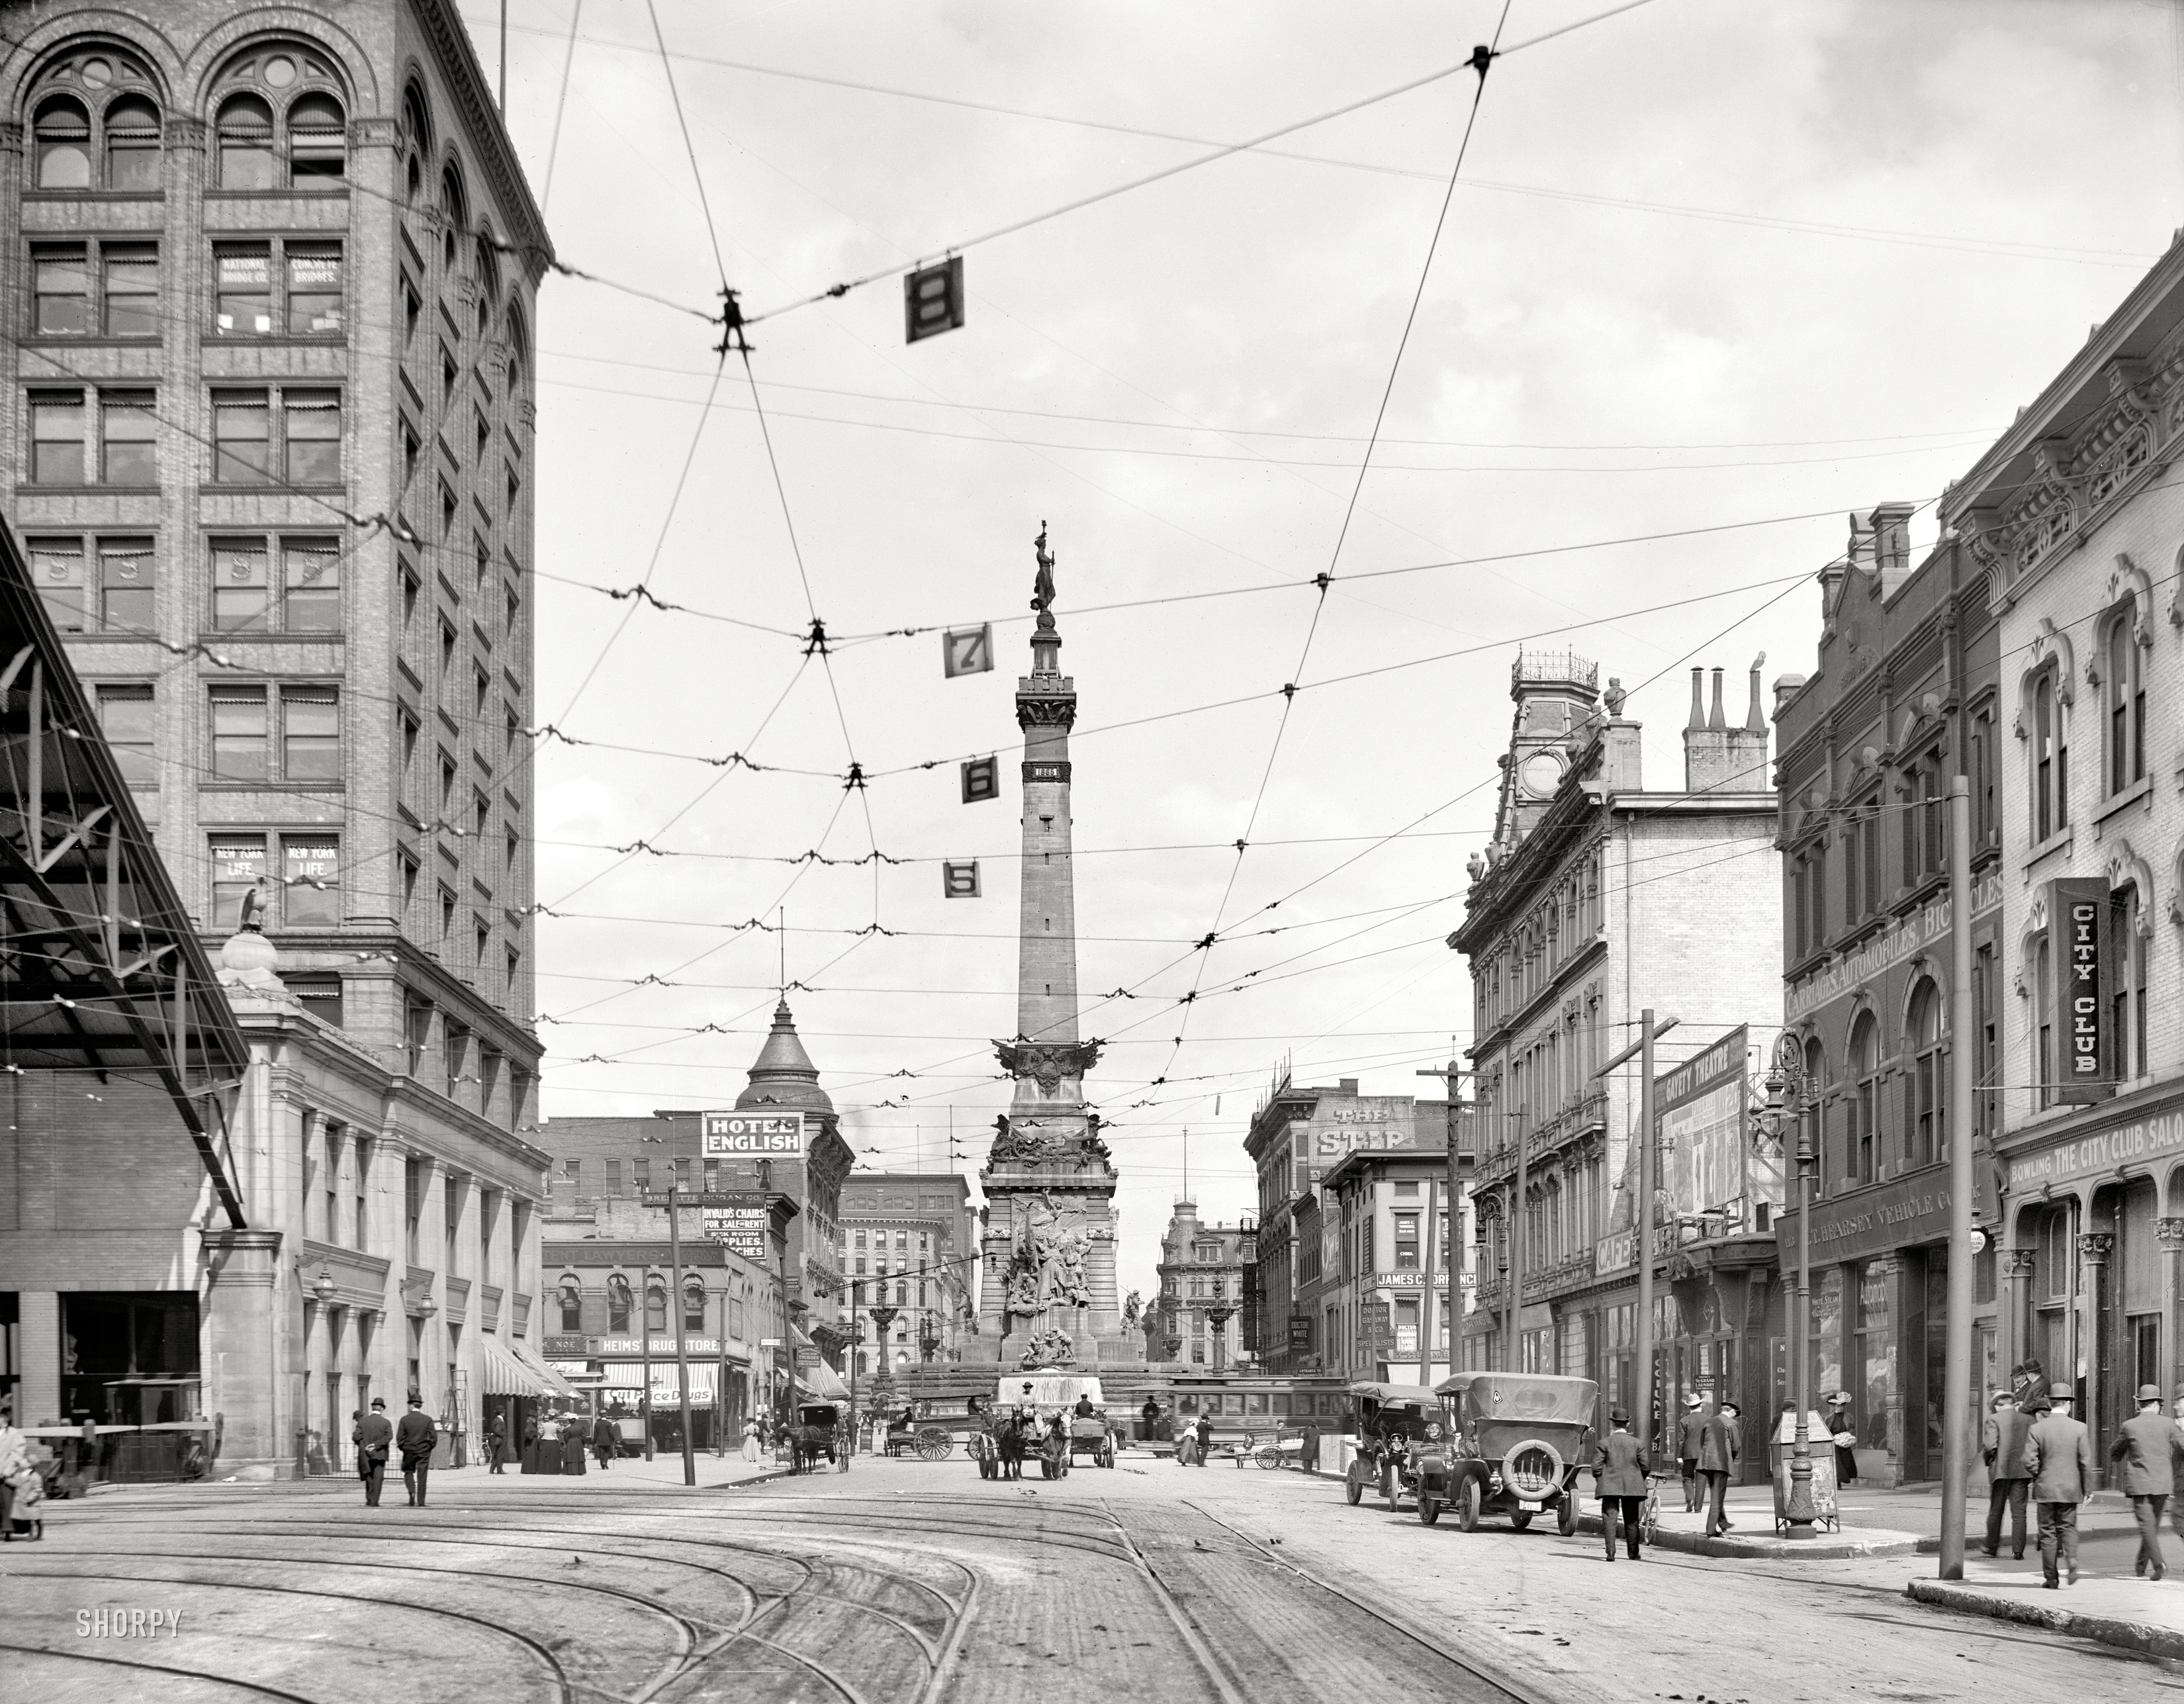 Indianapolis, Indiana, circa 1907. "West Market Street." Another view of the Union Terminal building and car barn seen in the previous post. Points of interest include the 1902 Soldiers and Sailors Monument, the Hearsey Vehicle Company to the right (dealer in gasoline, steam and electric automobiles) and, farther down the street, medical offices of Dr. Gasaway & Co., "specialists." View full size.